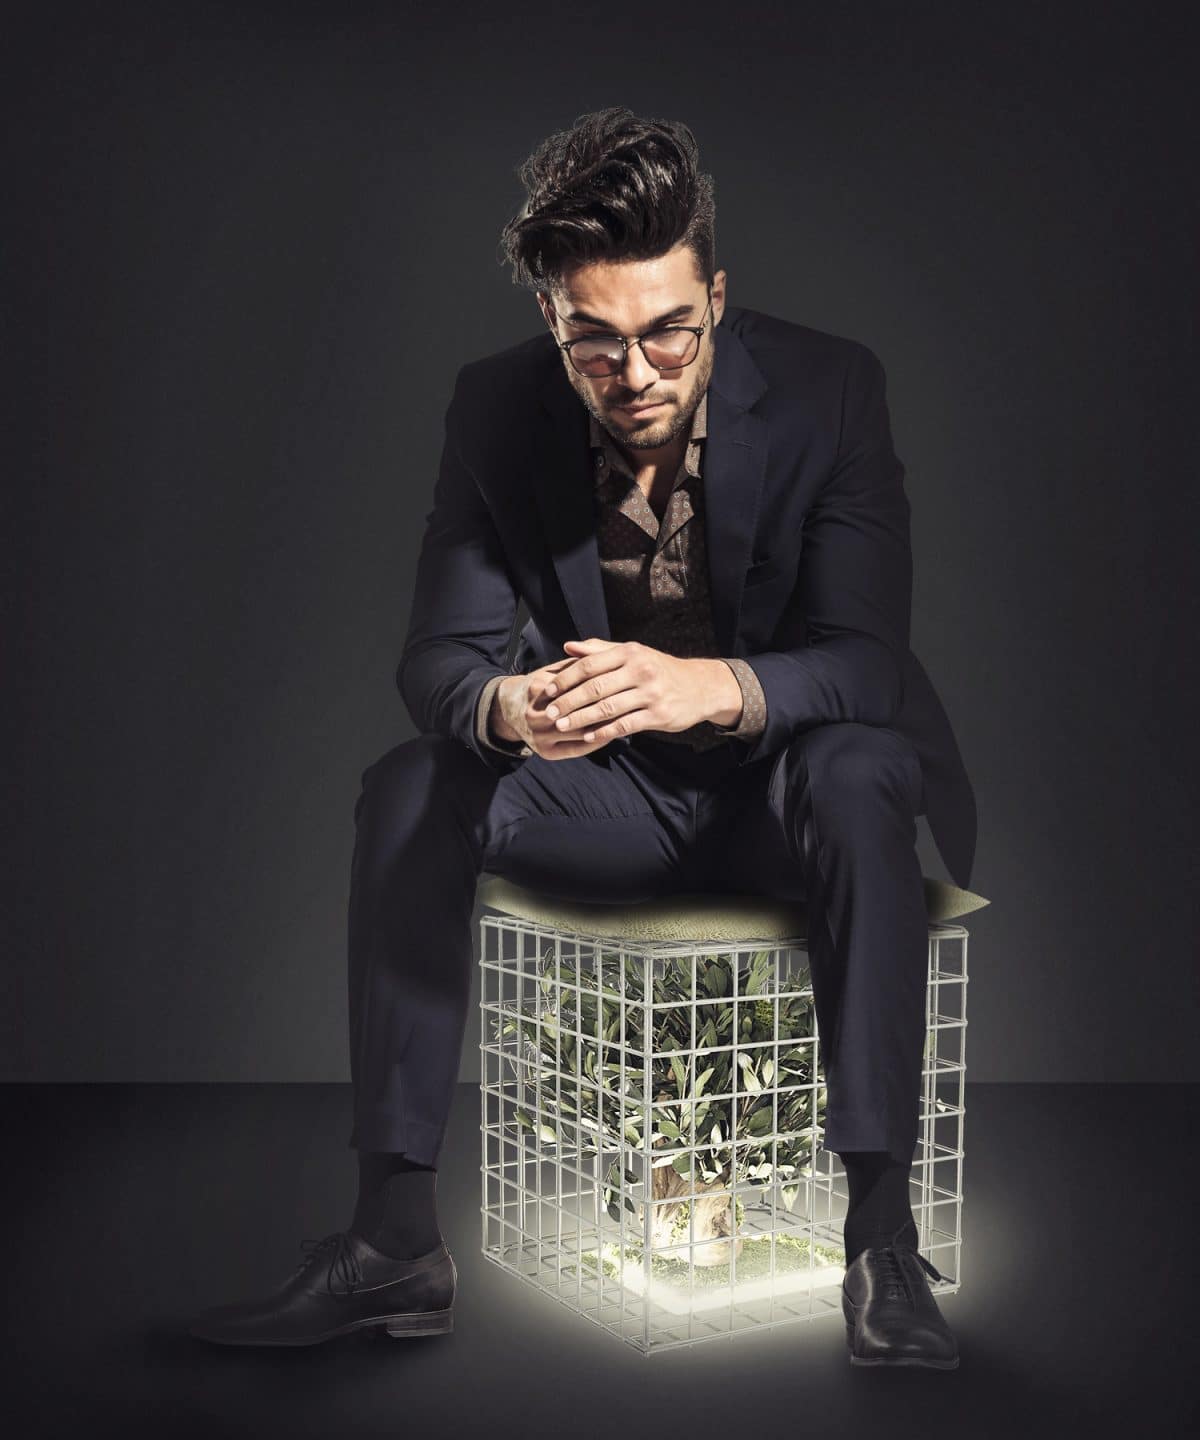 young business man sitting on chair and looking down, on grey studio background